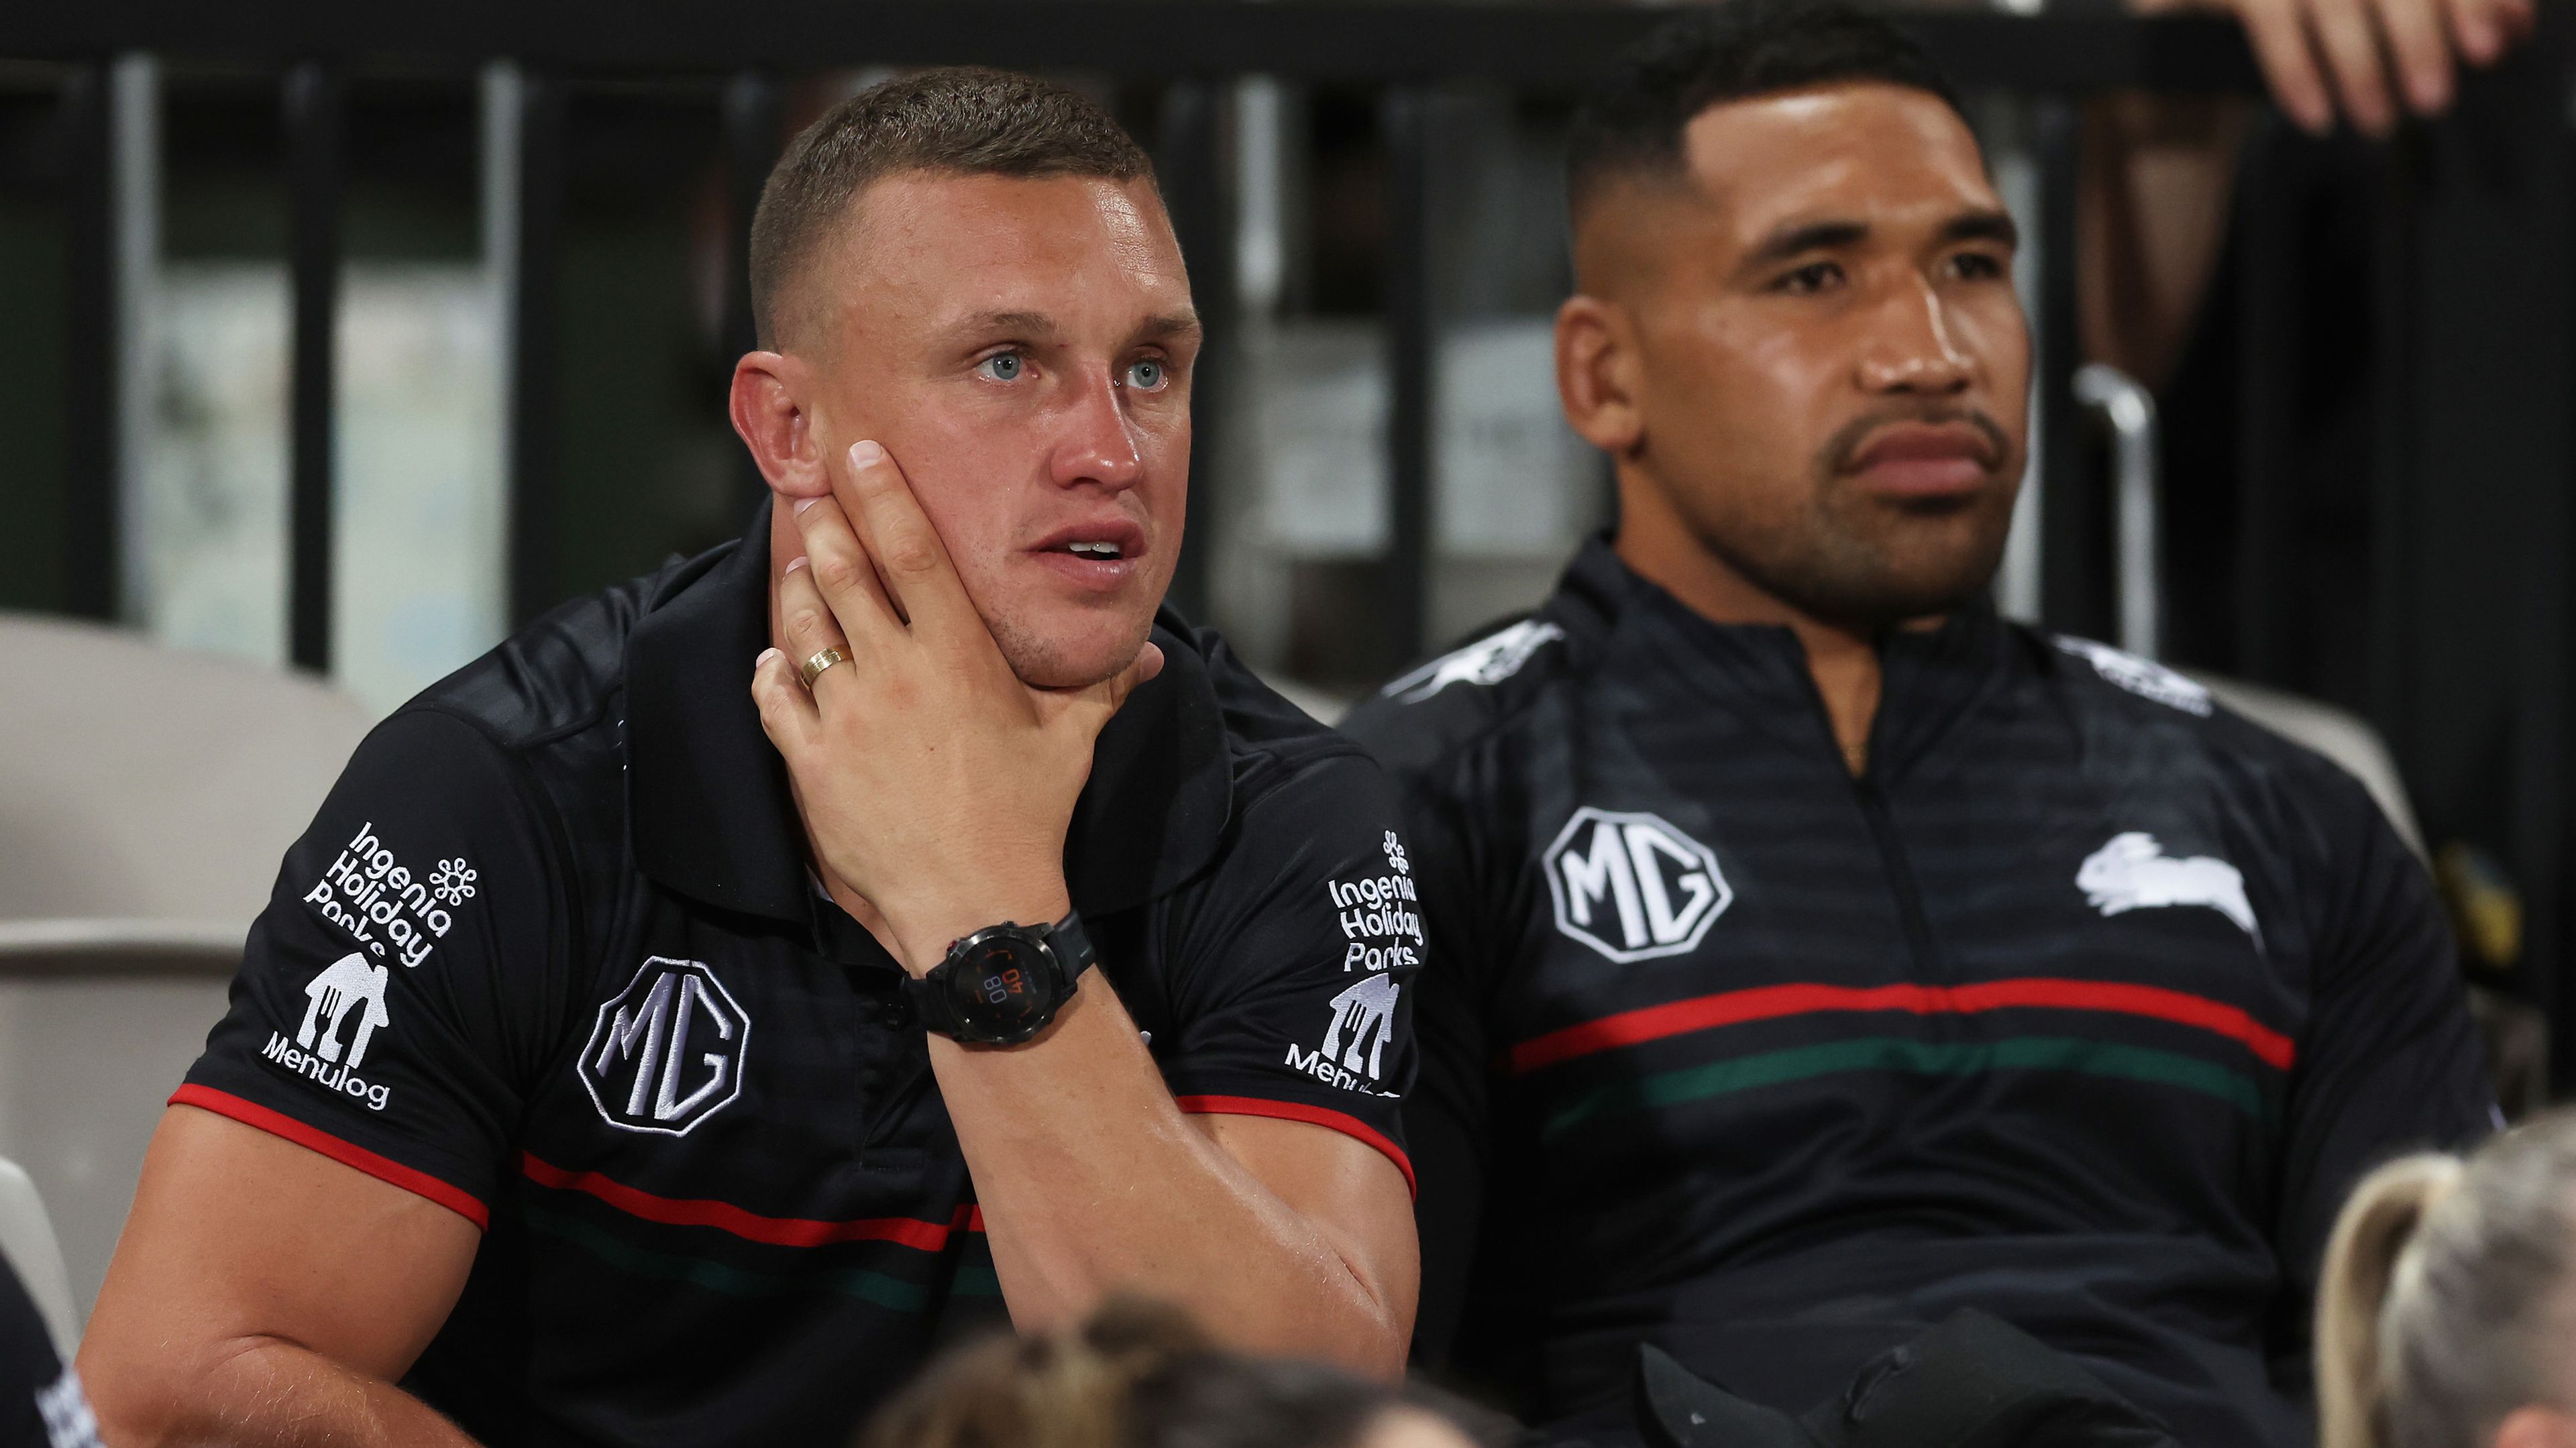 New Rabbitohs recruit Jack Wighton looks on during the NRL Pre-Season Challenge match between St George Illawarra Dragons and South Sydney Rabbitohs.